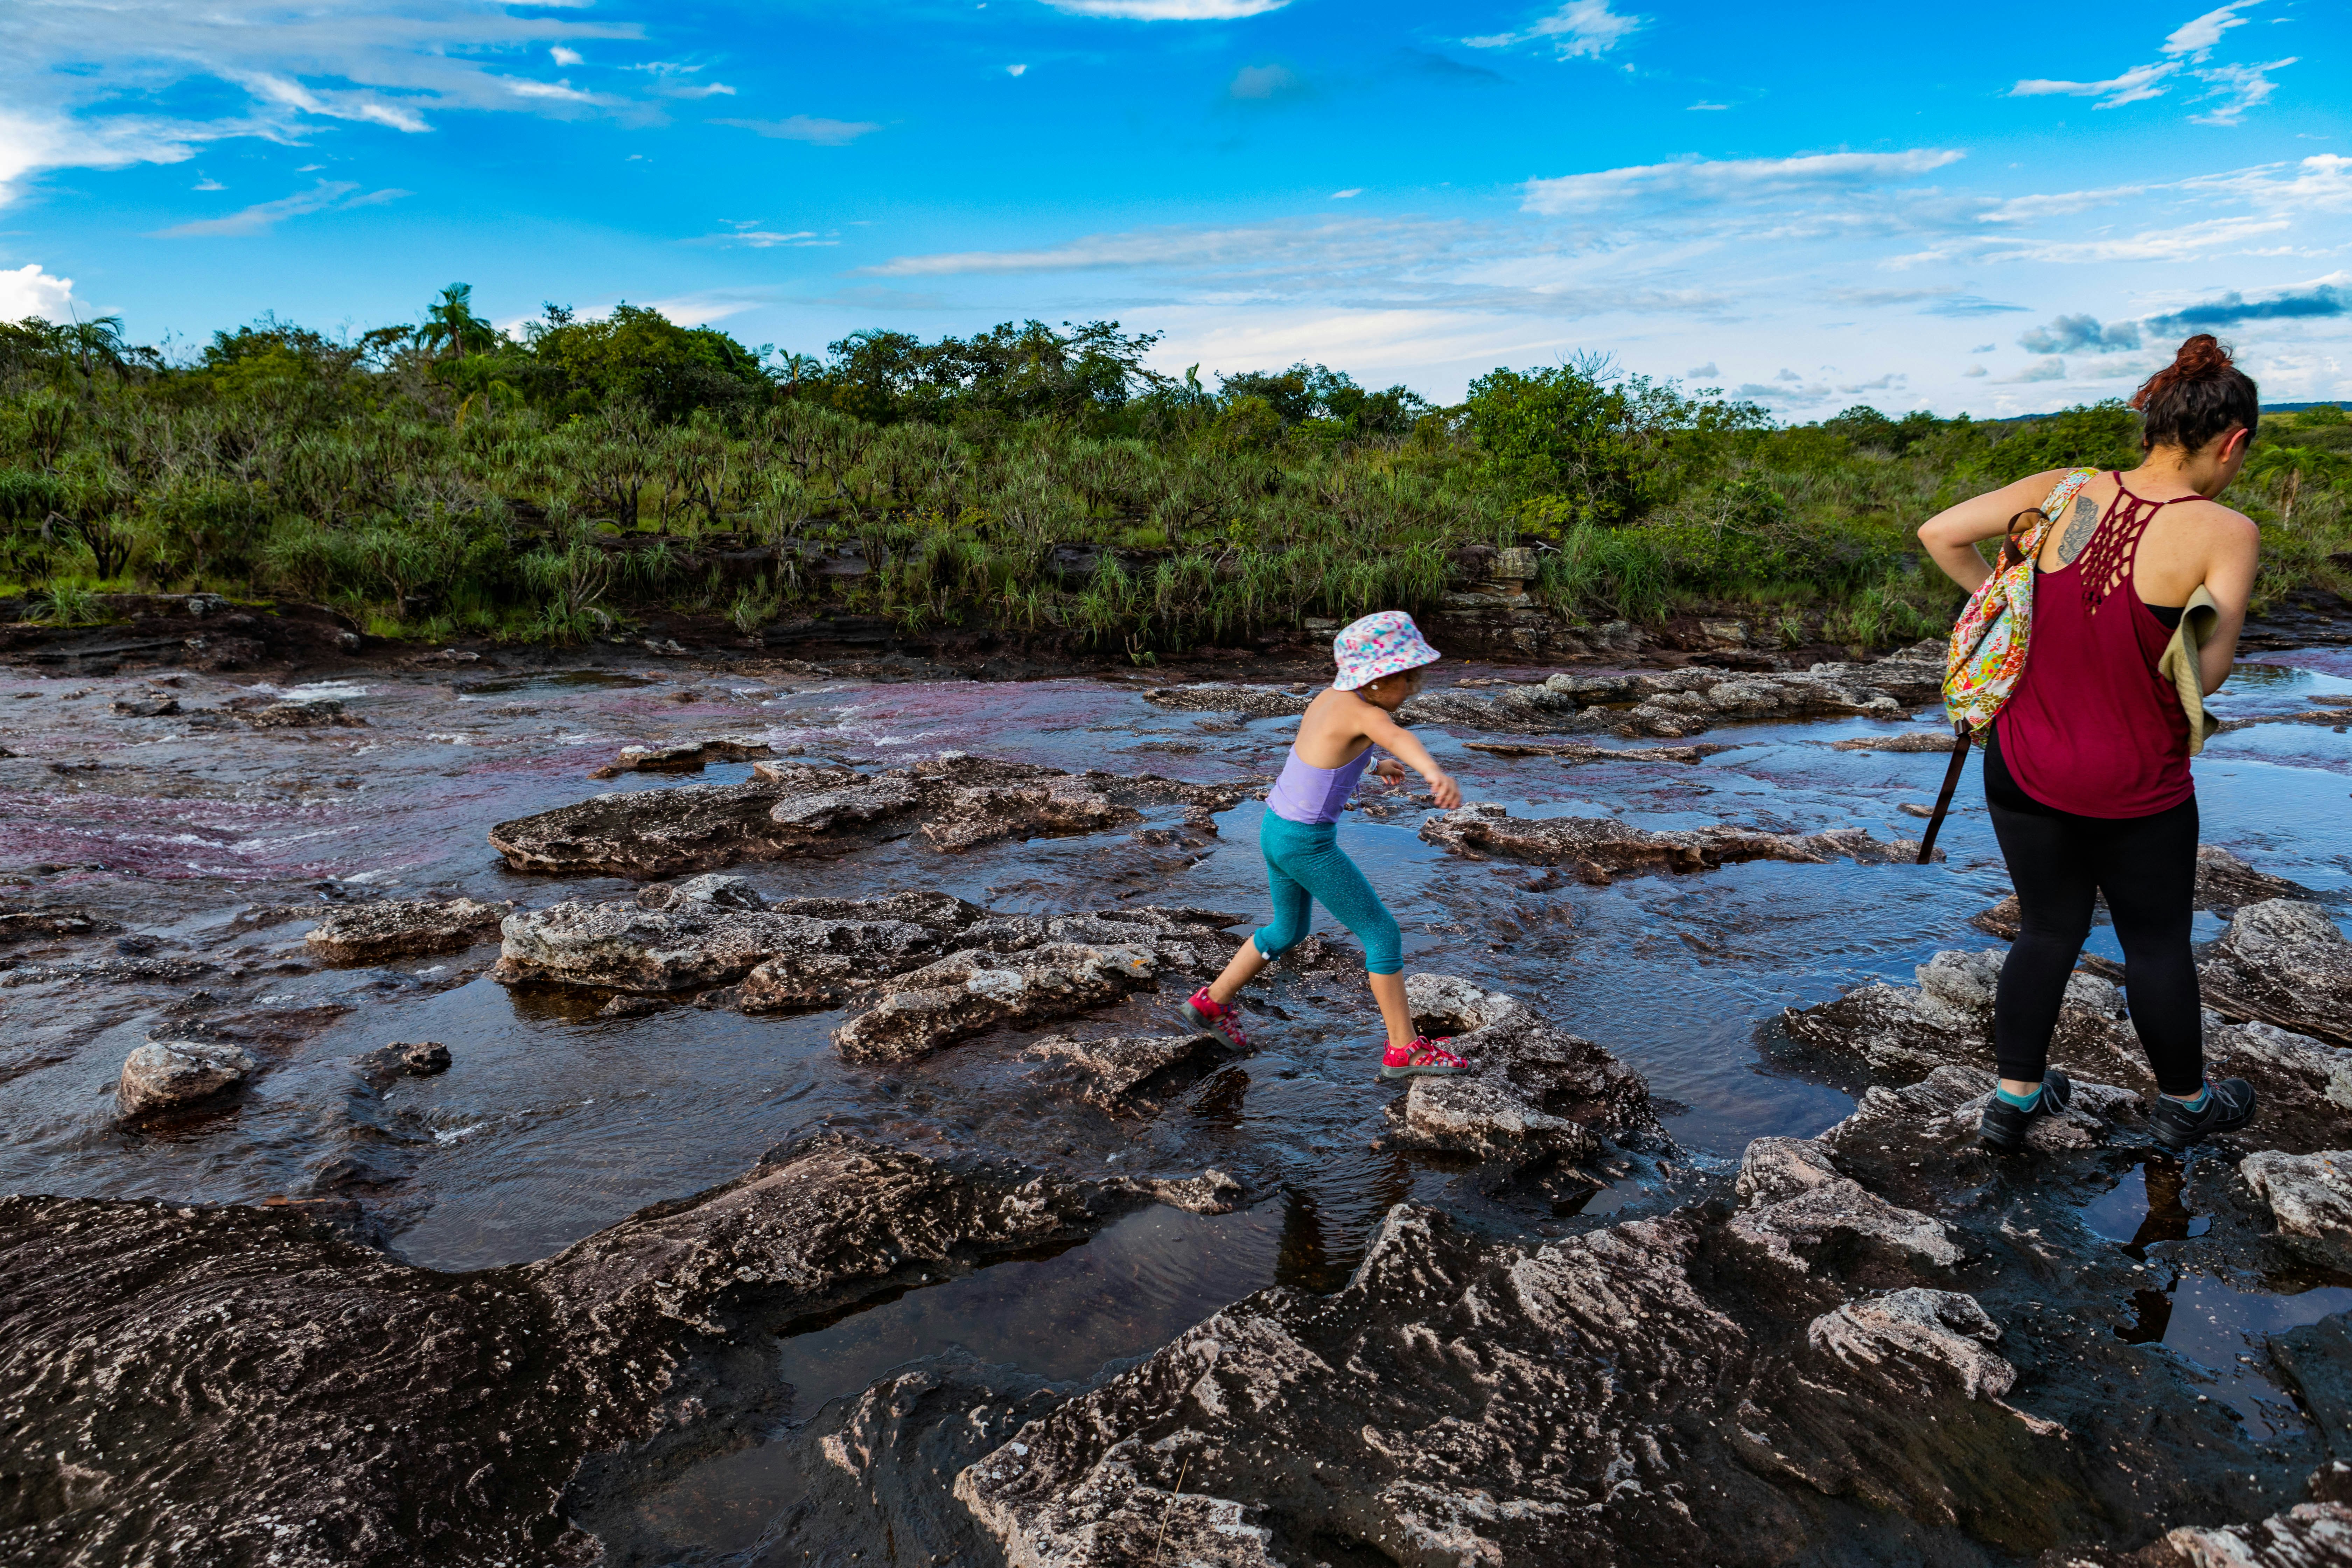 A little girl in blue leggings and a purple swim top hops between rocks on the Cano Cristales river next to a woman in a red tank top and black leggings